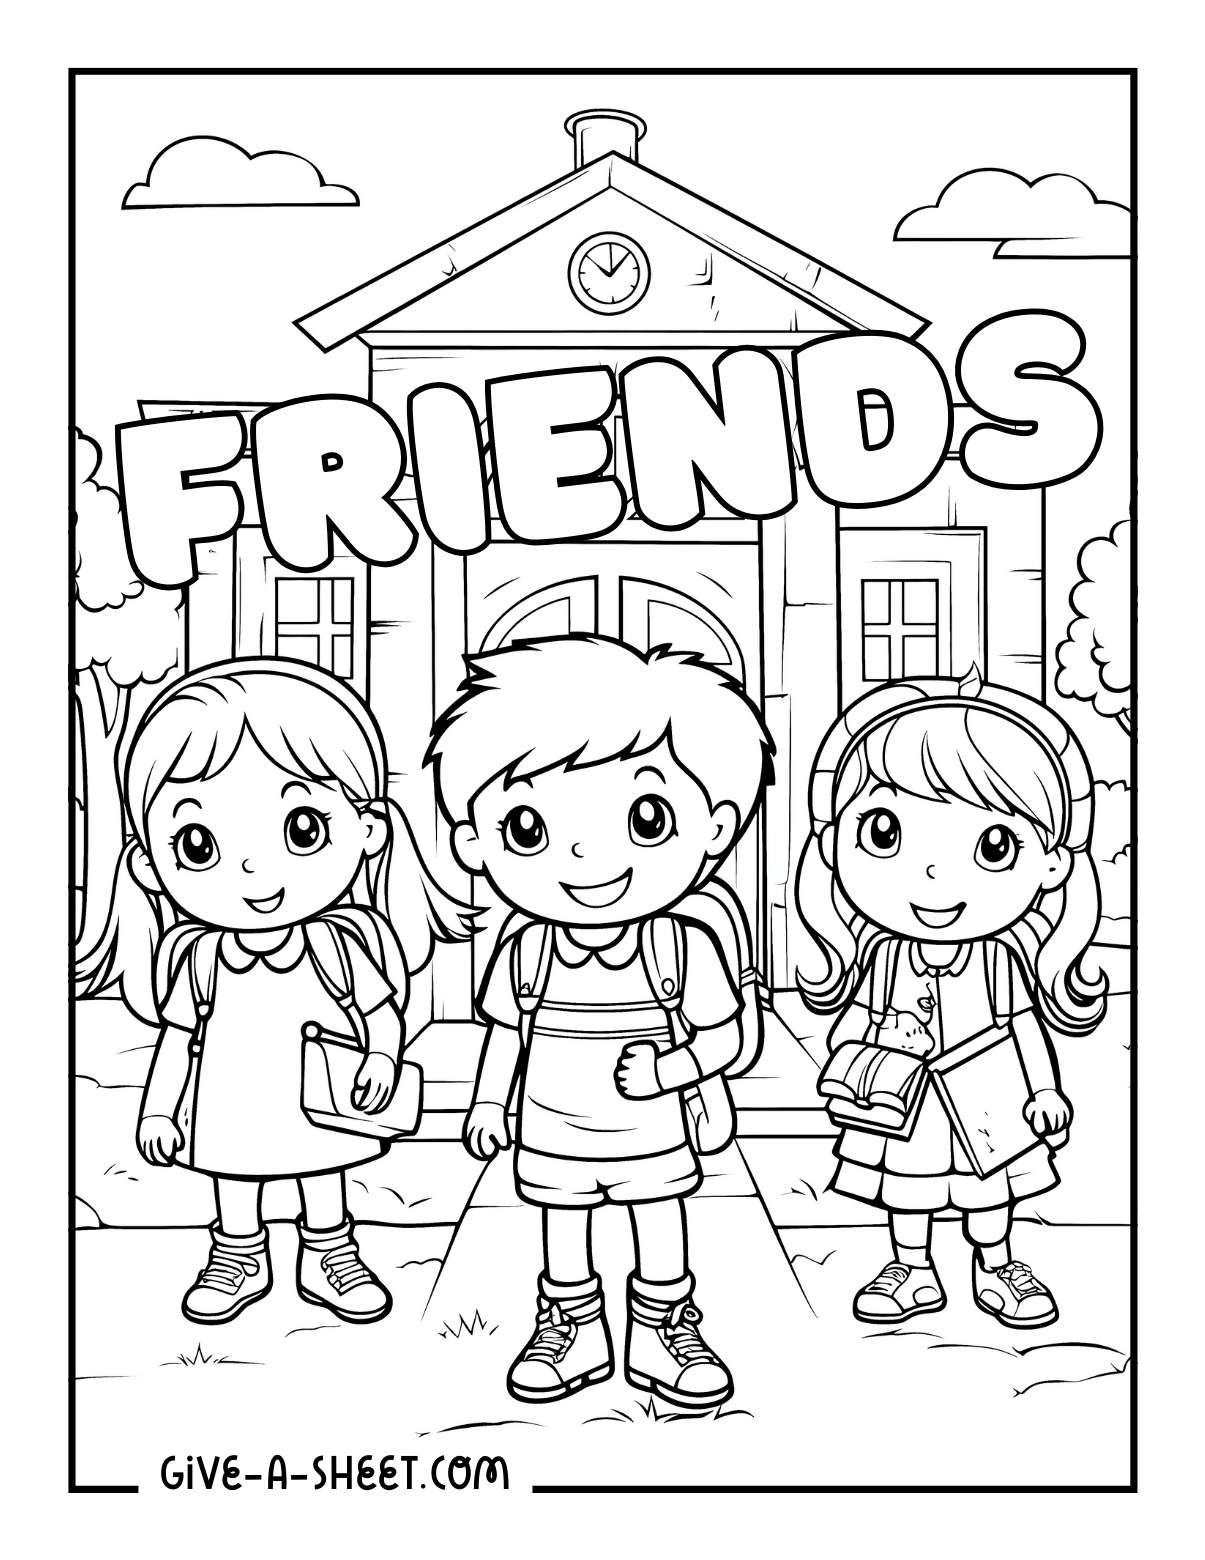 Three best friends coloring page in school.